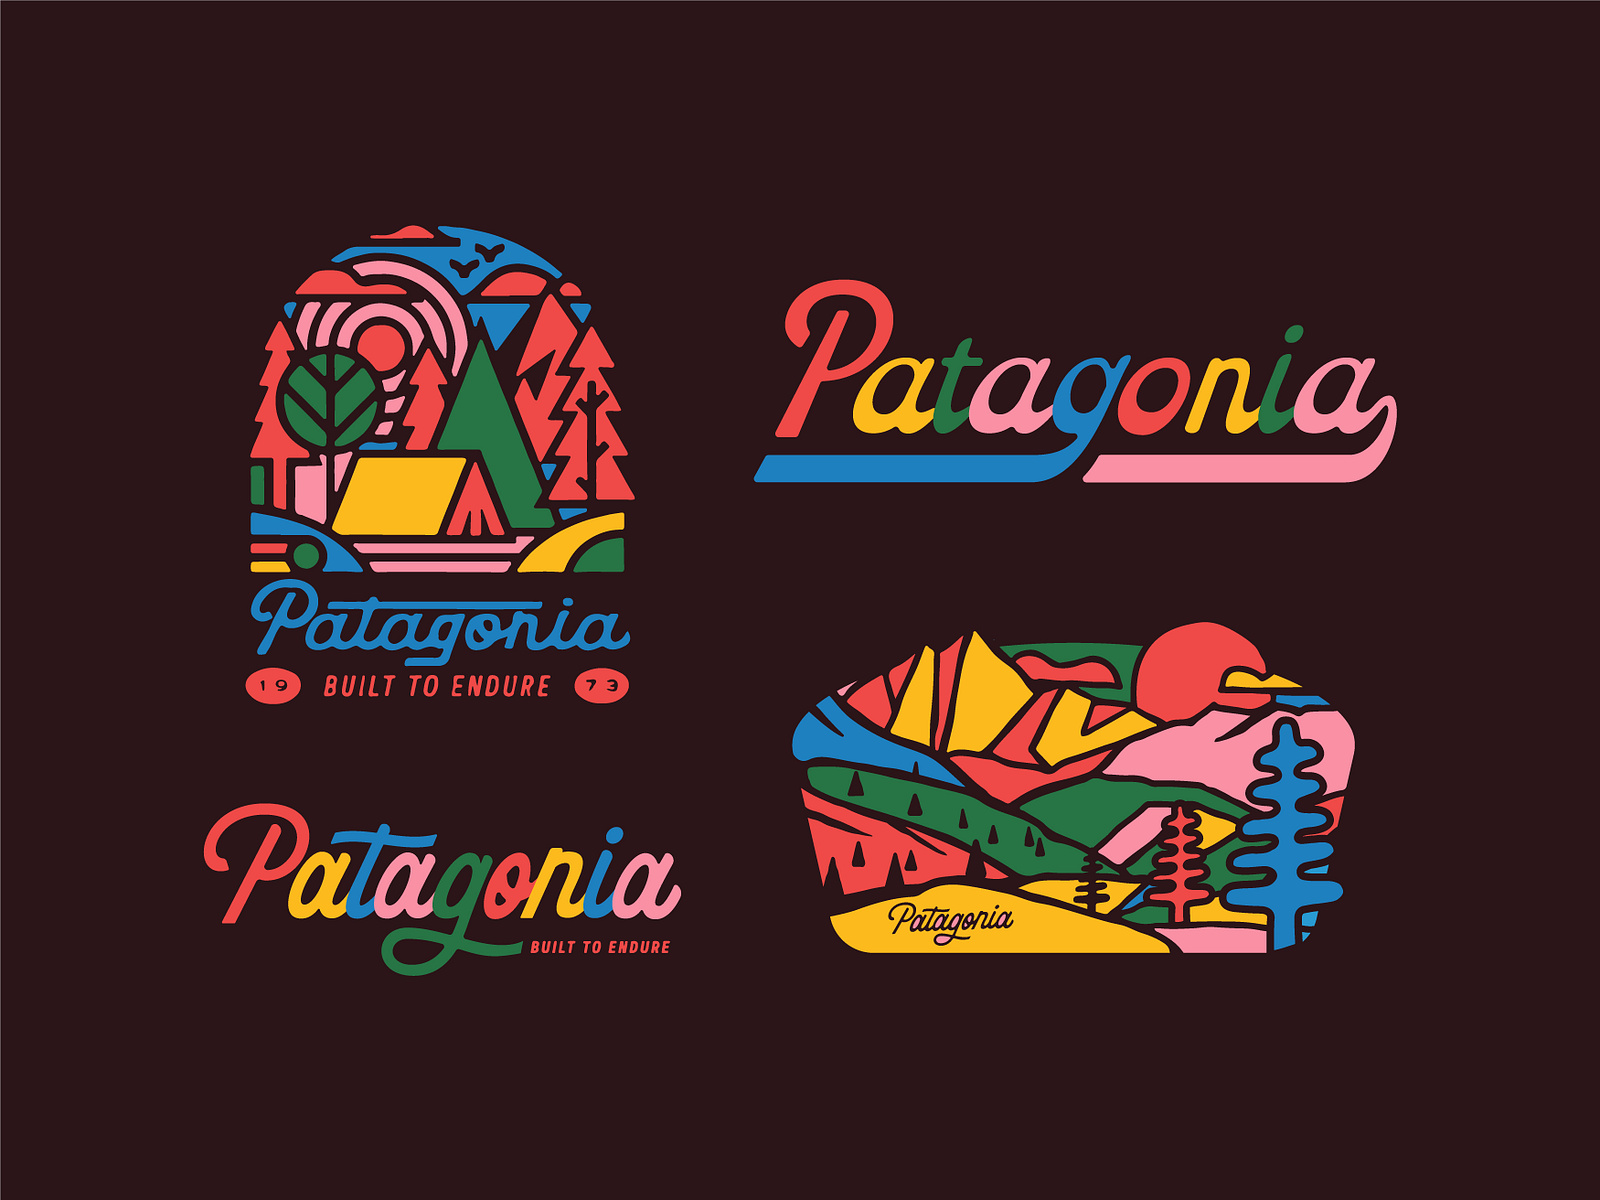 Patagonia Company Profile by brownlikethecolor_ - Issuu